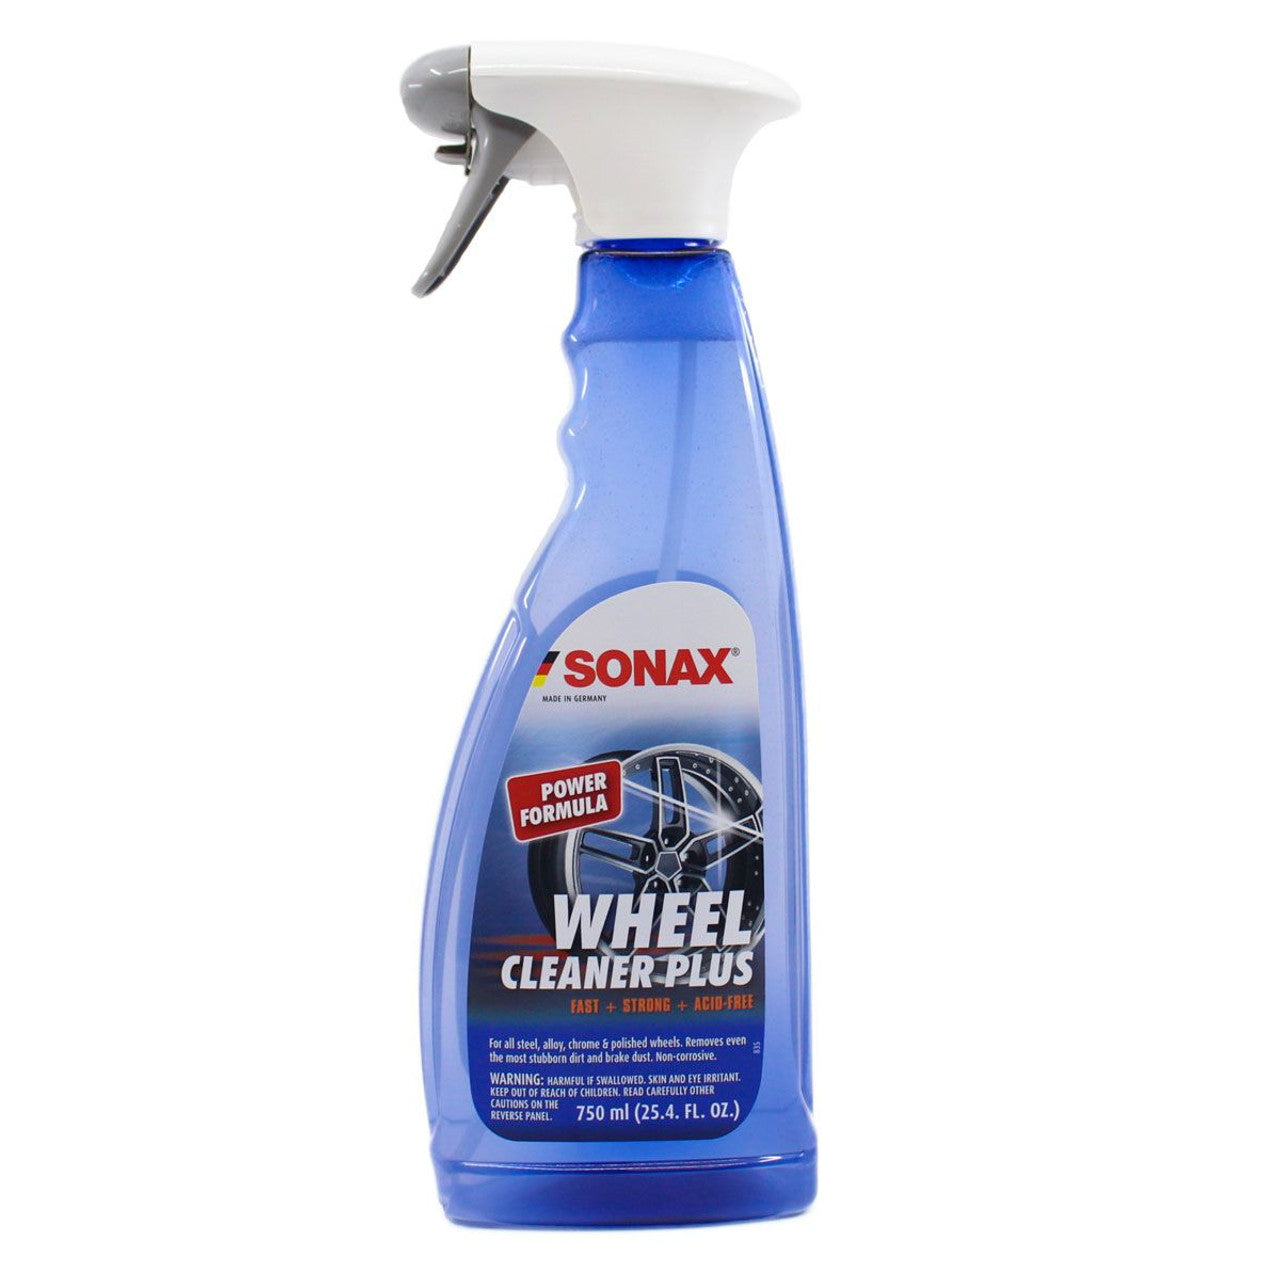 Sonax Wheel Cleaner PLUS - 750ml - Sierra Madre Collection